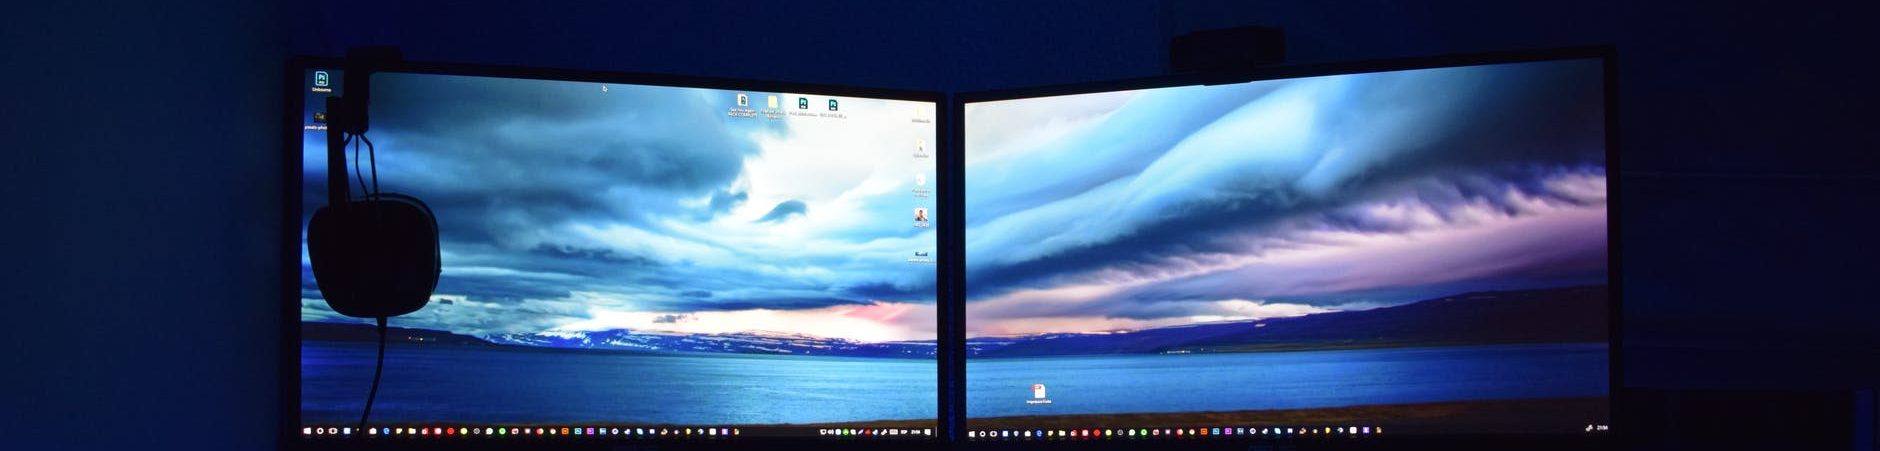 two computer flat screen monitors turned on